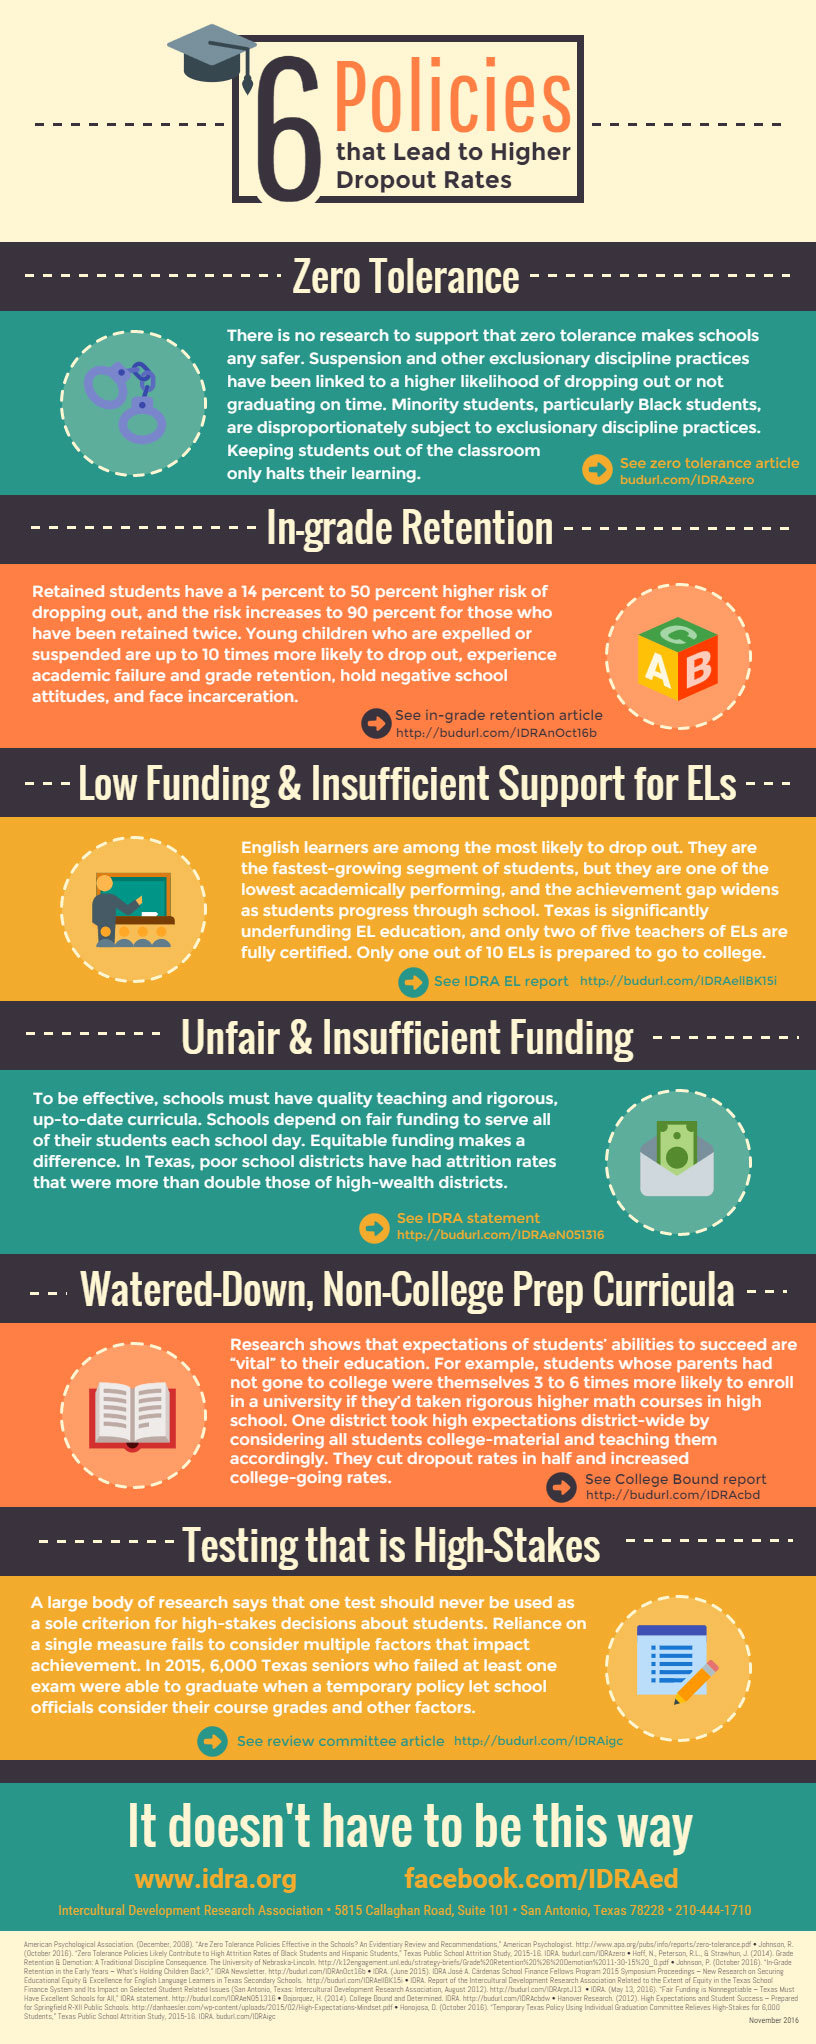 6-school-policies-that-lead-to-higher-dropout-rates-infographic-idra